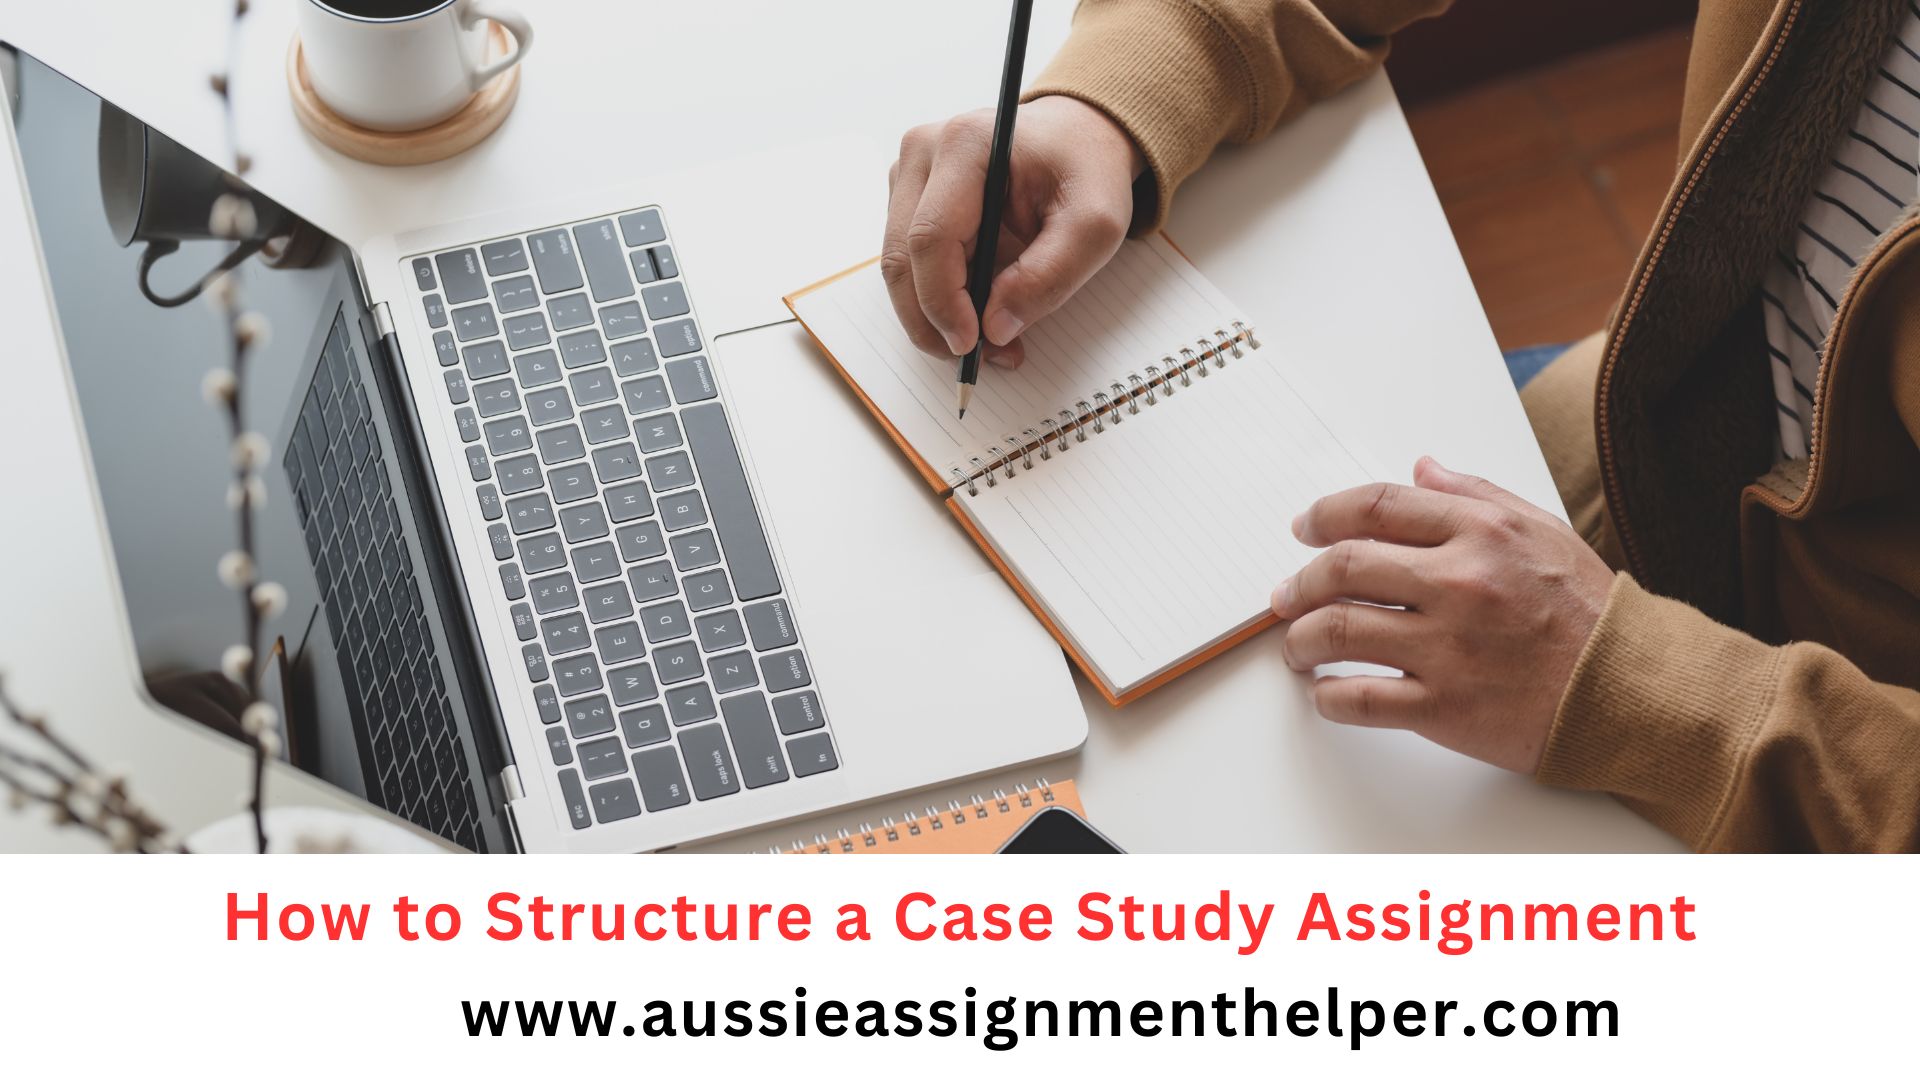 How to Structure a Case Study Assignment